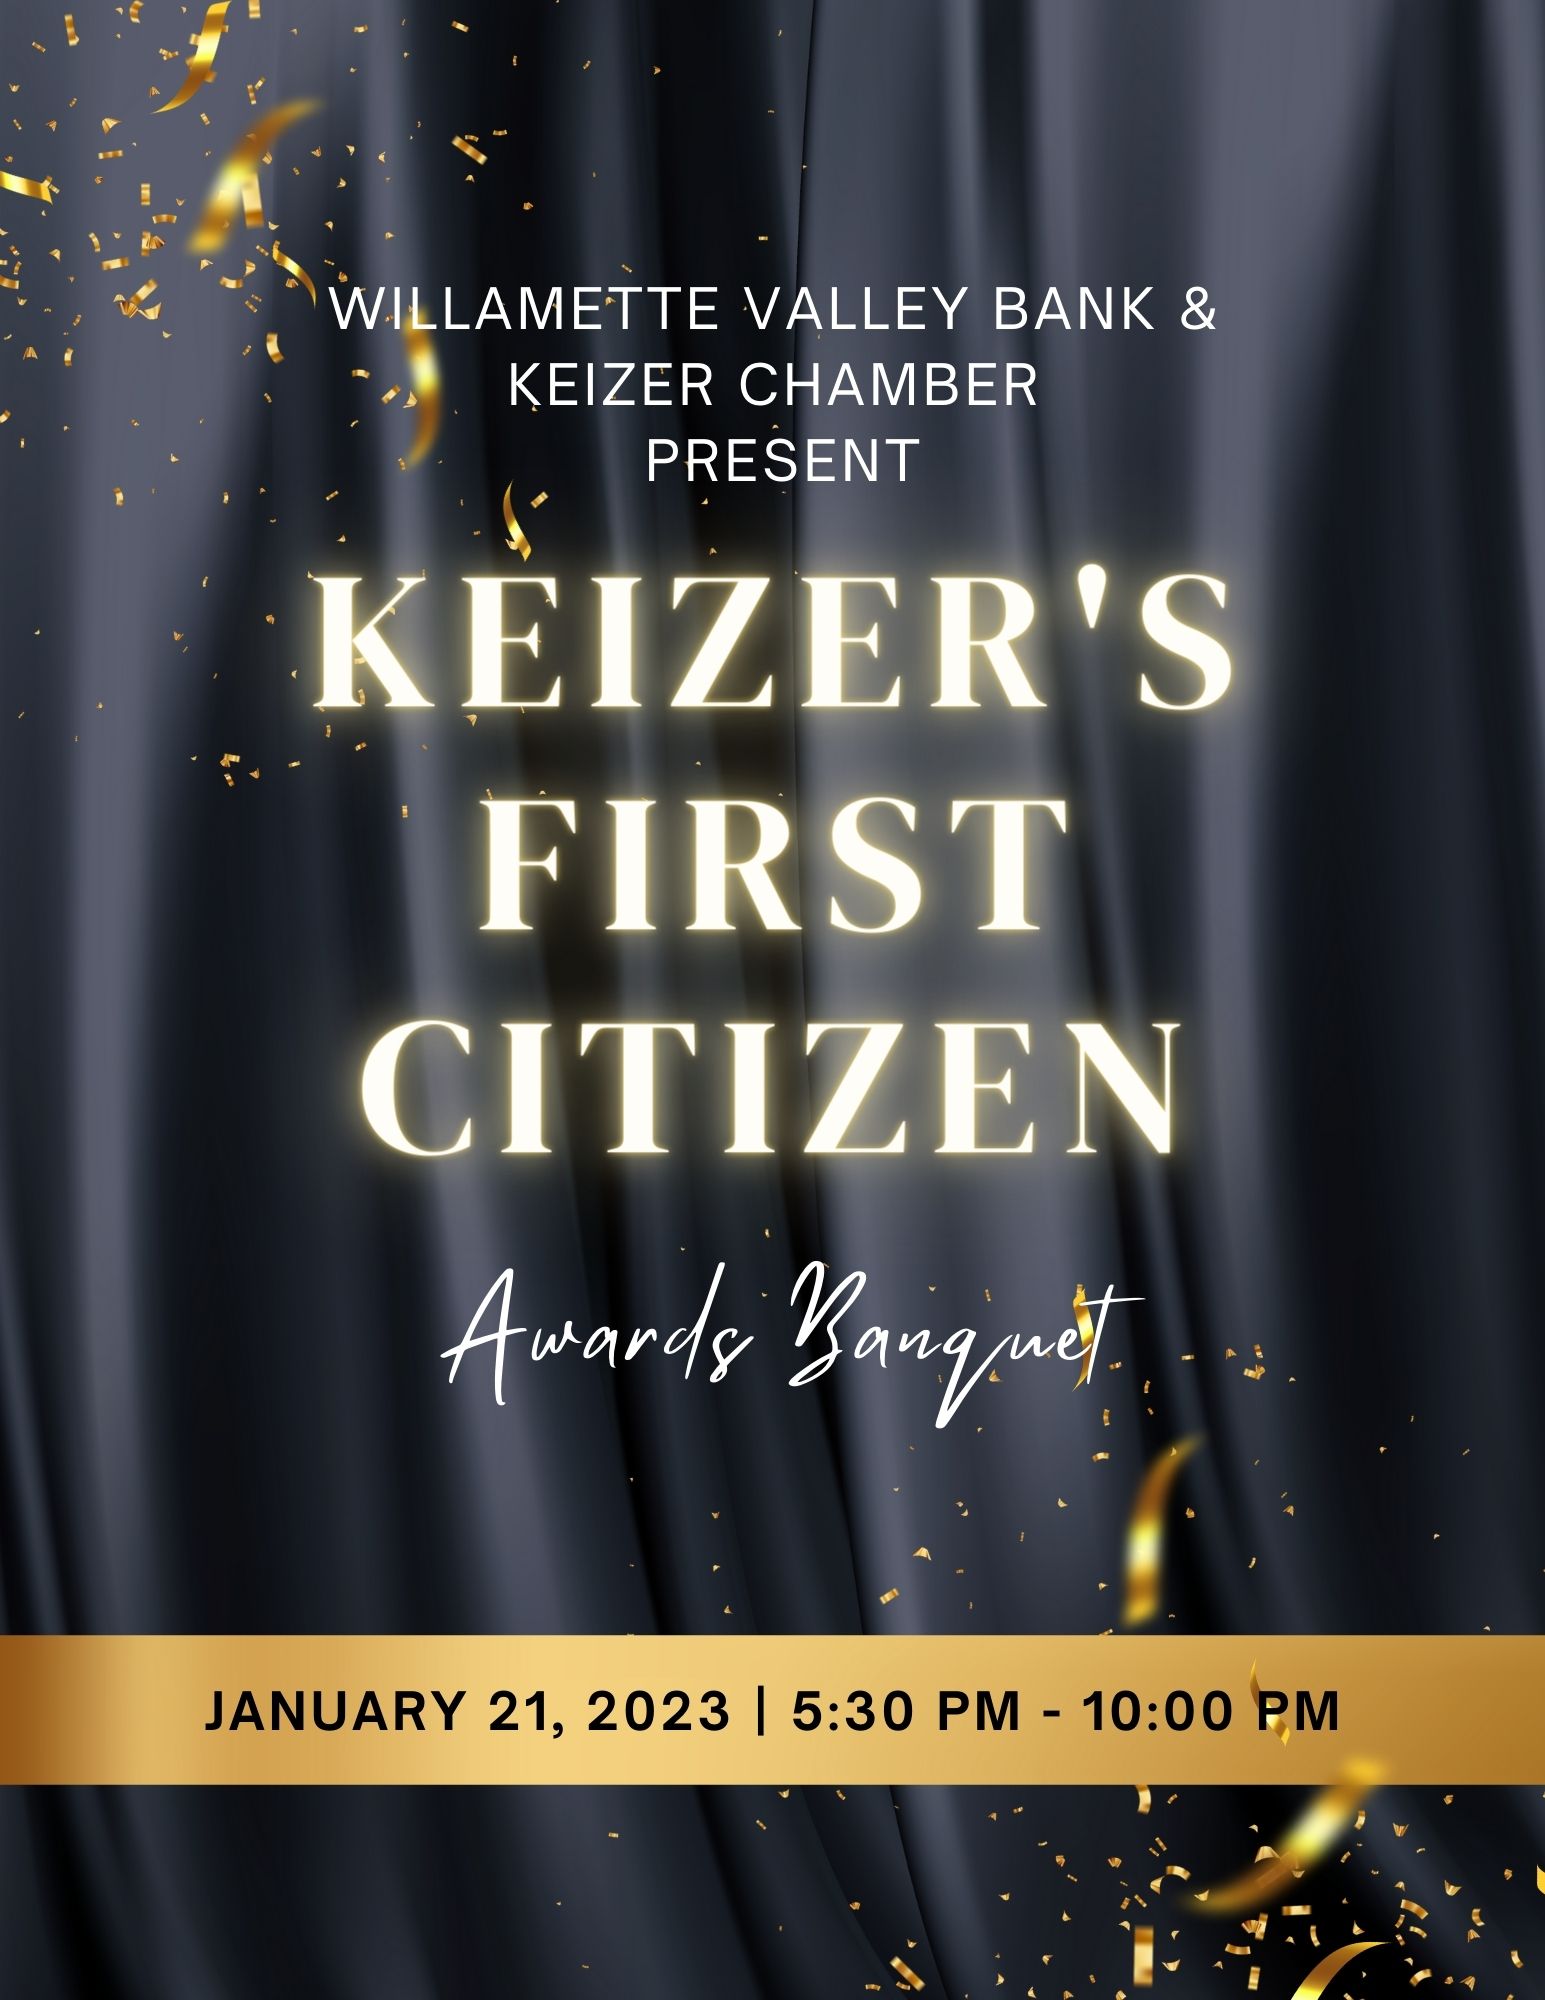 Keizer First Citizen Award Banquet Flyer for Jan 21, 2023 Black stage curtains with gold confetti pouring down